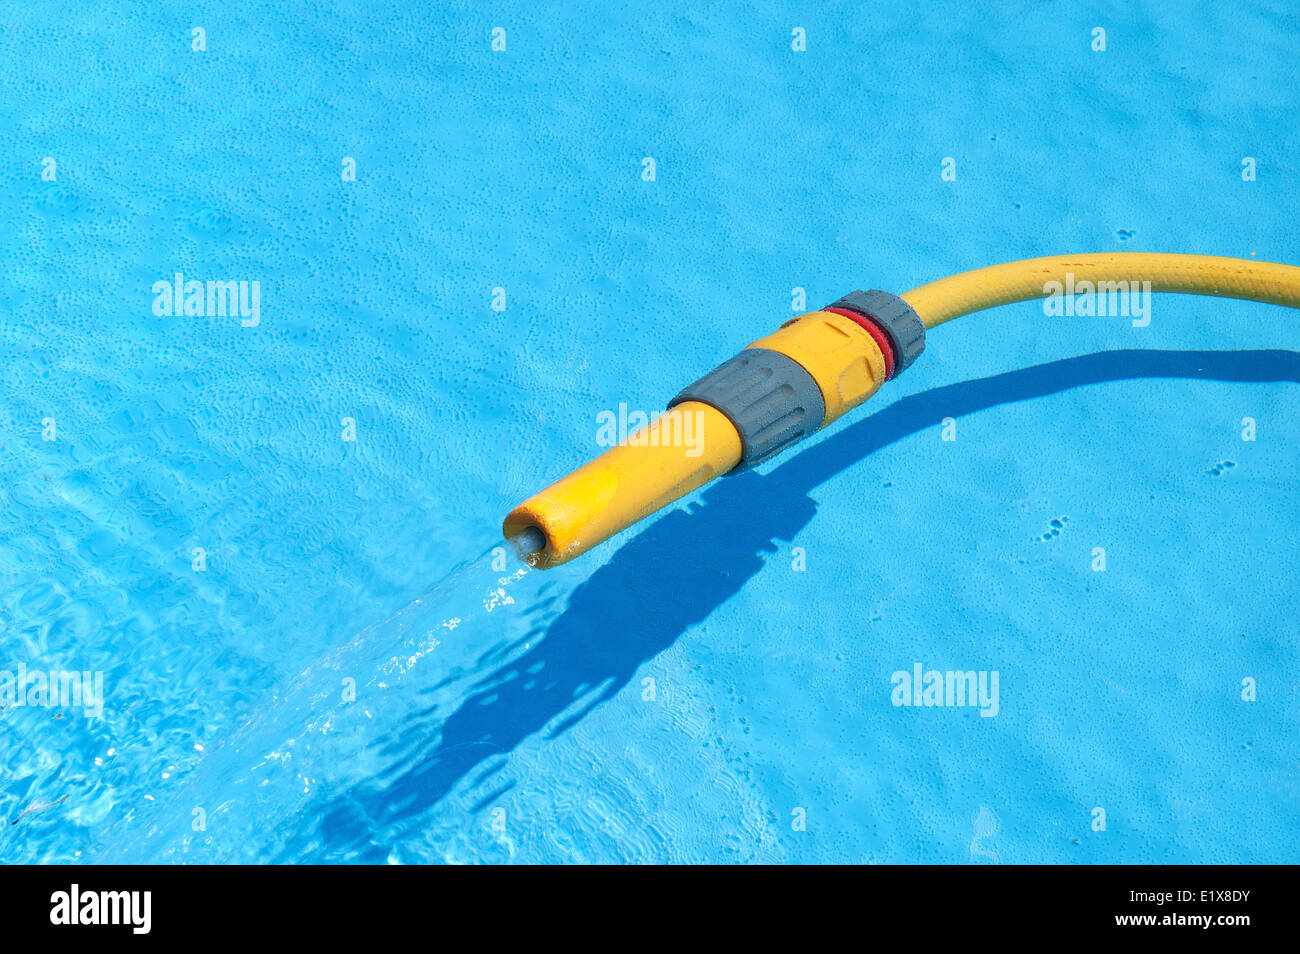 a hosepipe filling up a pool Stock Photo